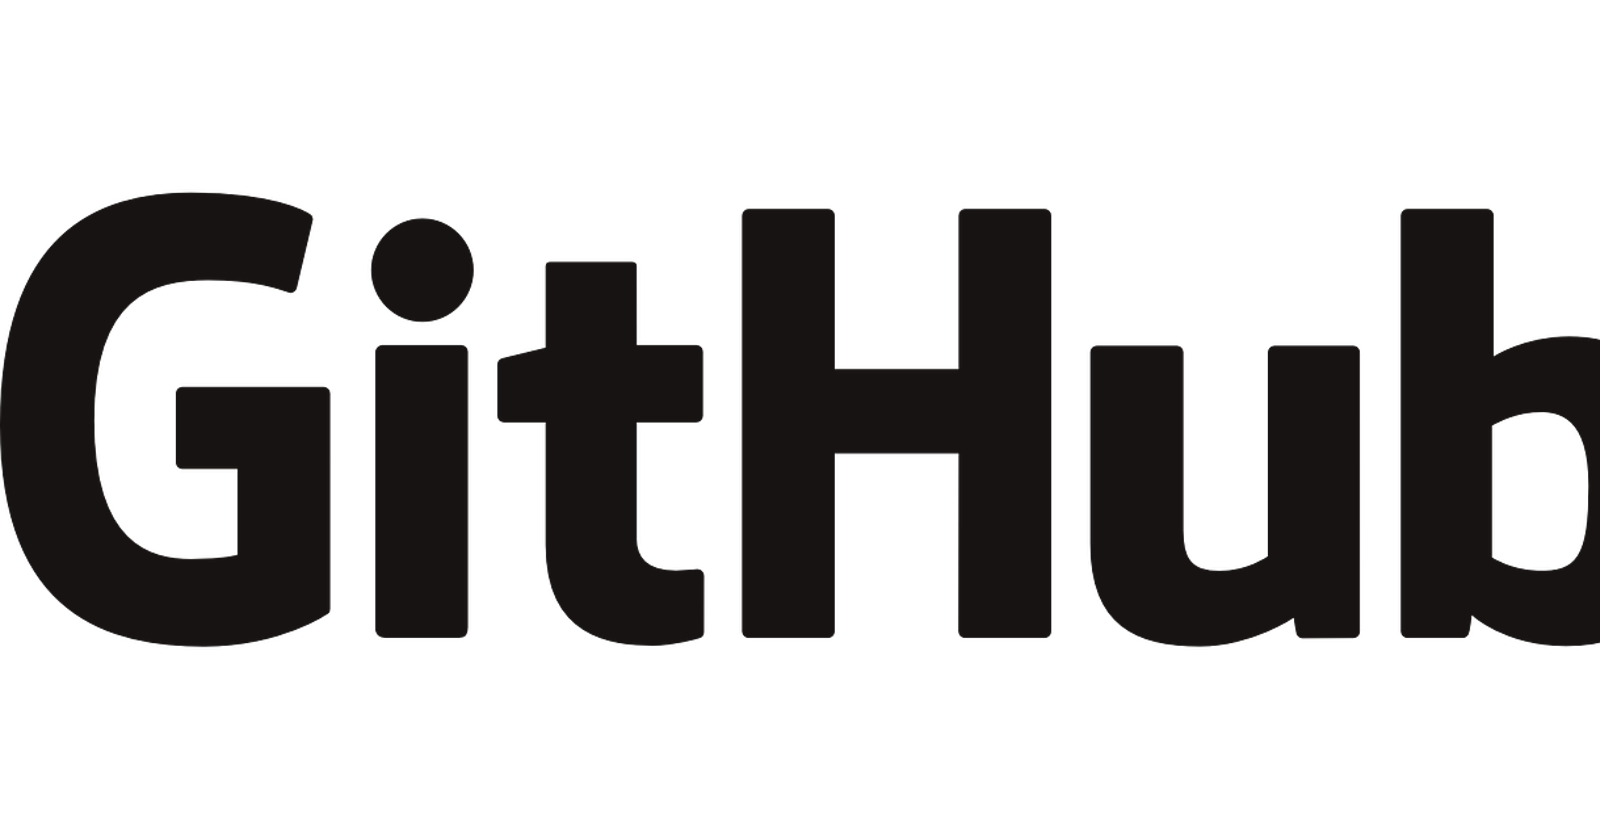 IN 10 EASY STEPS, UPLOAD YOUR PROJECT ON GITHUB USING GITBASH TERMINAL